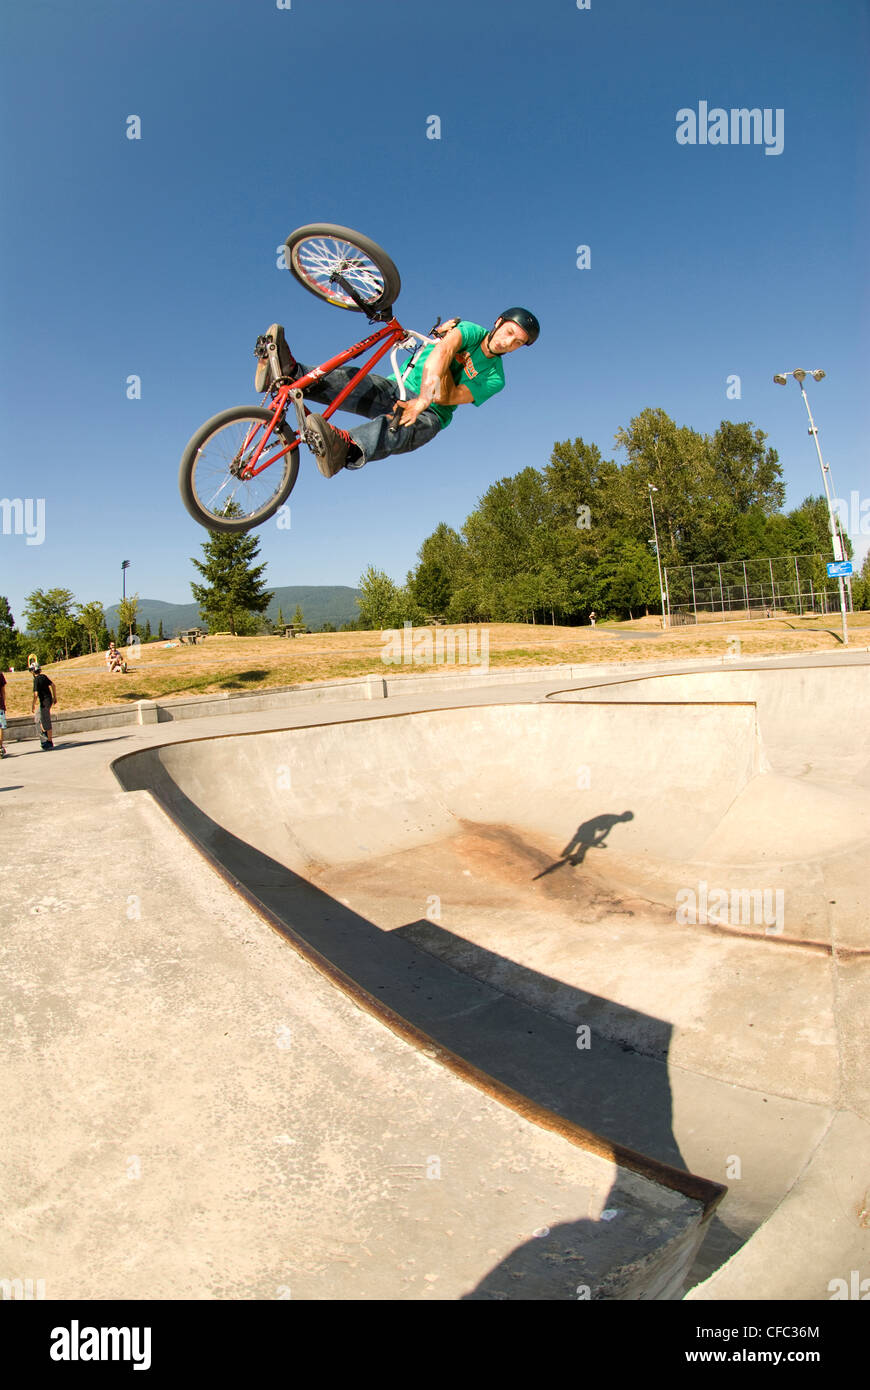 BMXer with an X-up air at Lafarge Skatepark, Coquitlam, BC Canada. Stock Photo